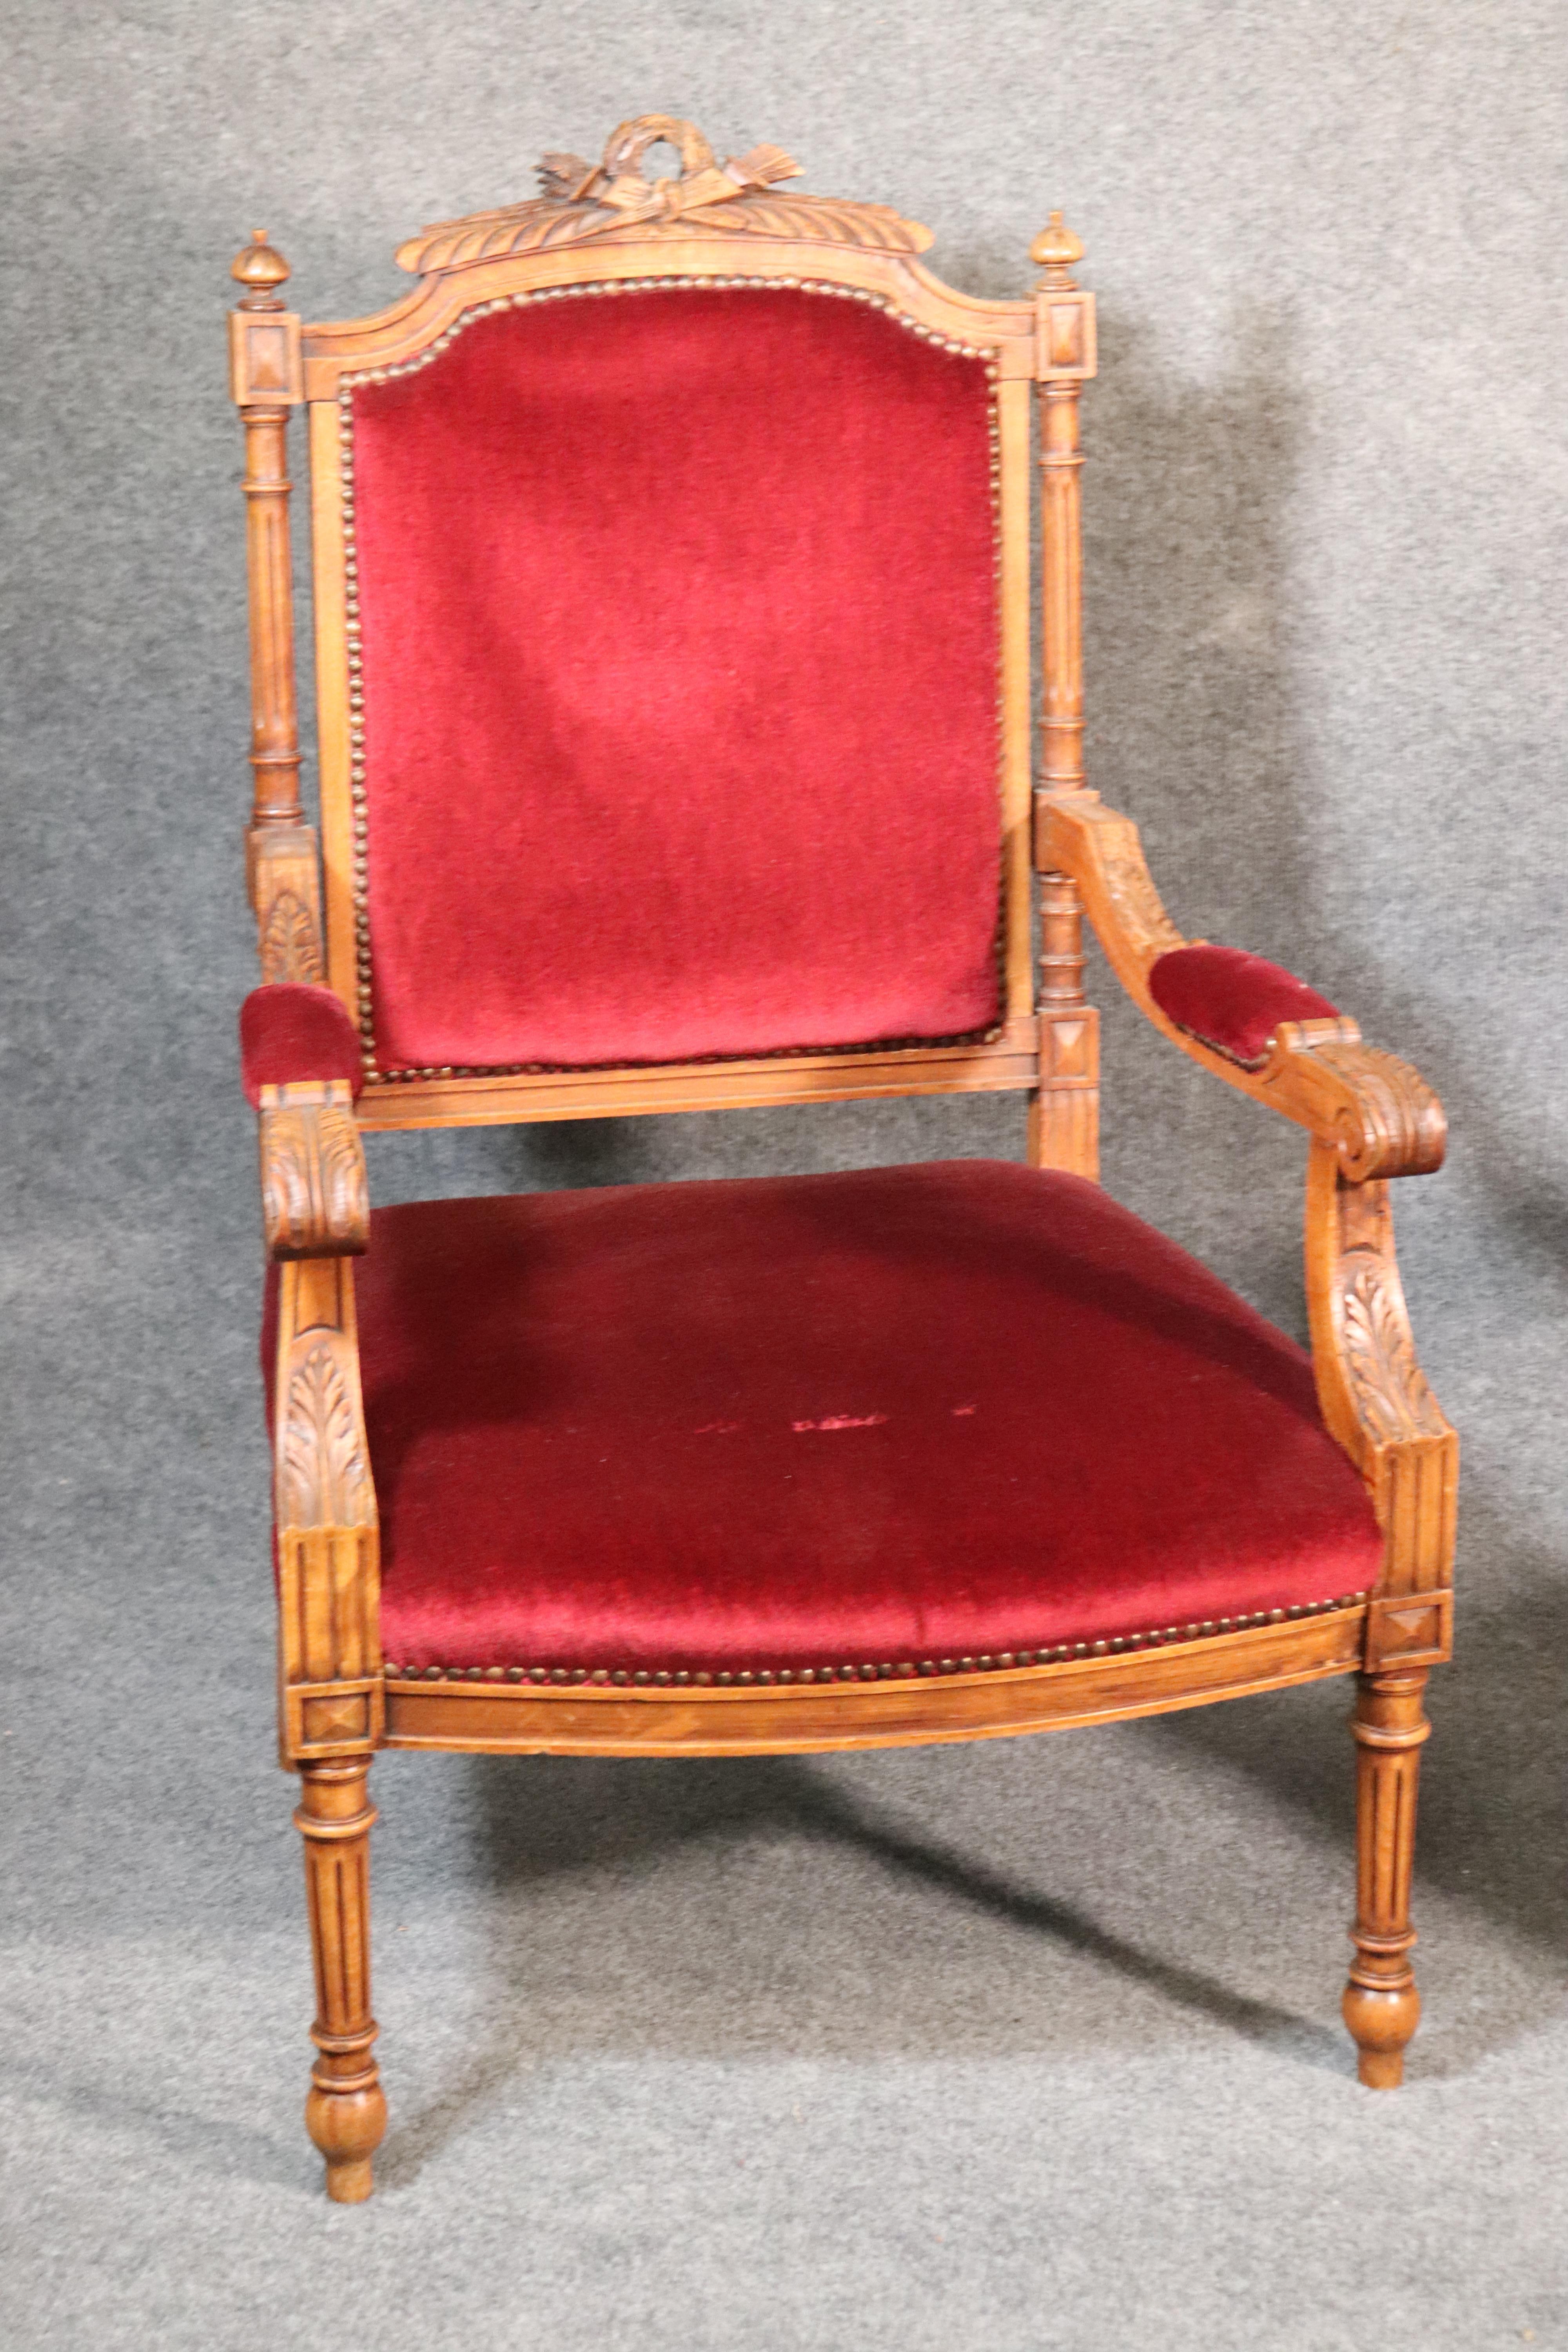 This is a gorgeous pair of French Louis XVI armchairs that are in very good condition with nice burgundy or wine hued velvet in good condition. The frames are beautifully carved and in good original condition. They measure 39.25 tall x 24.25 wide x